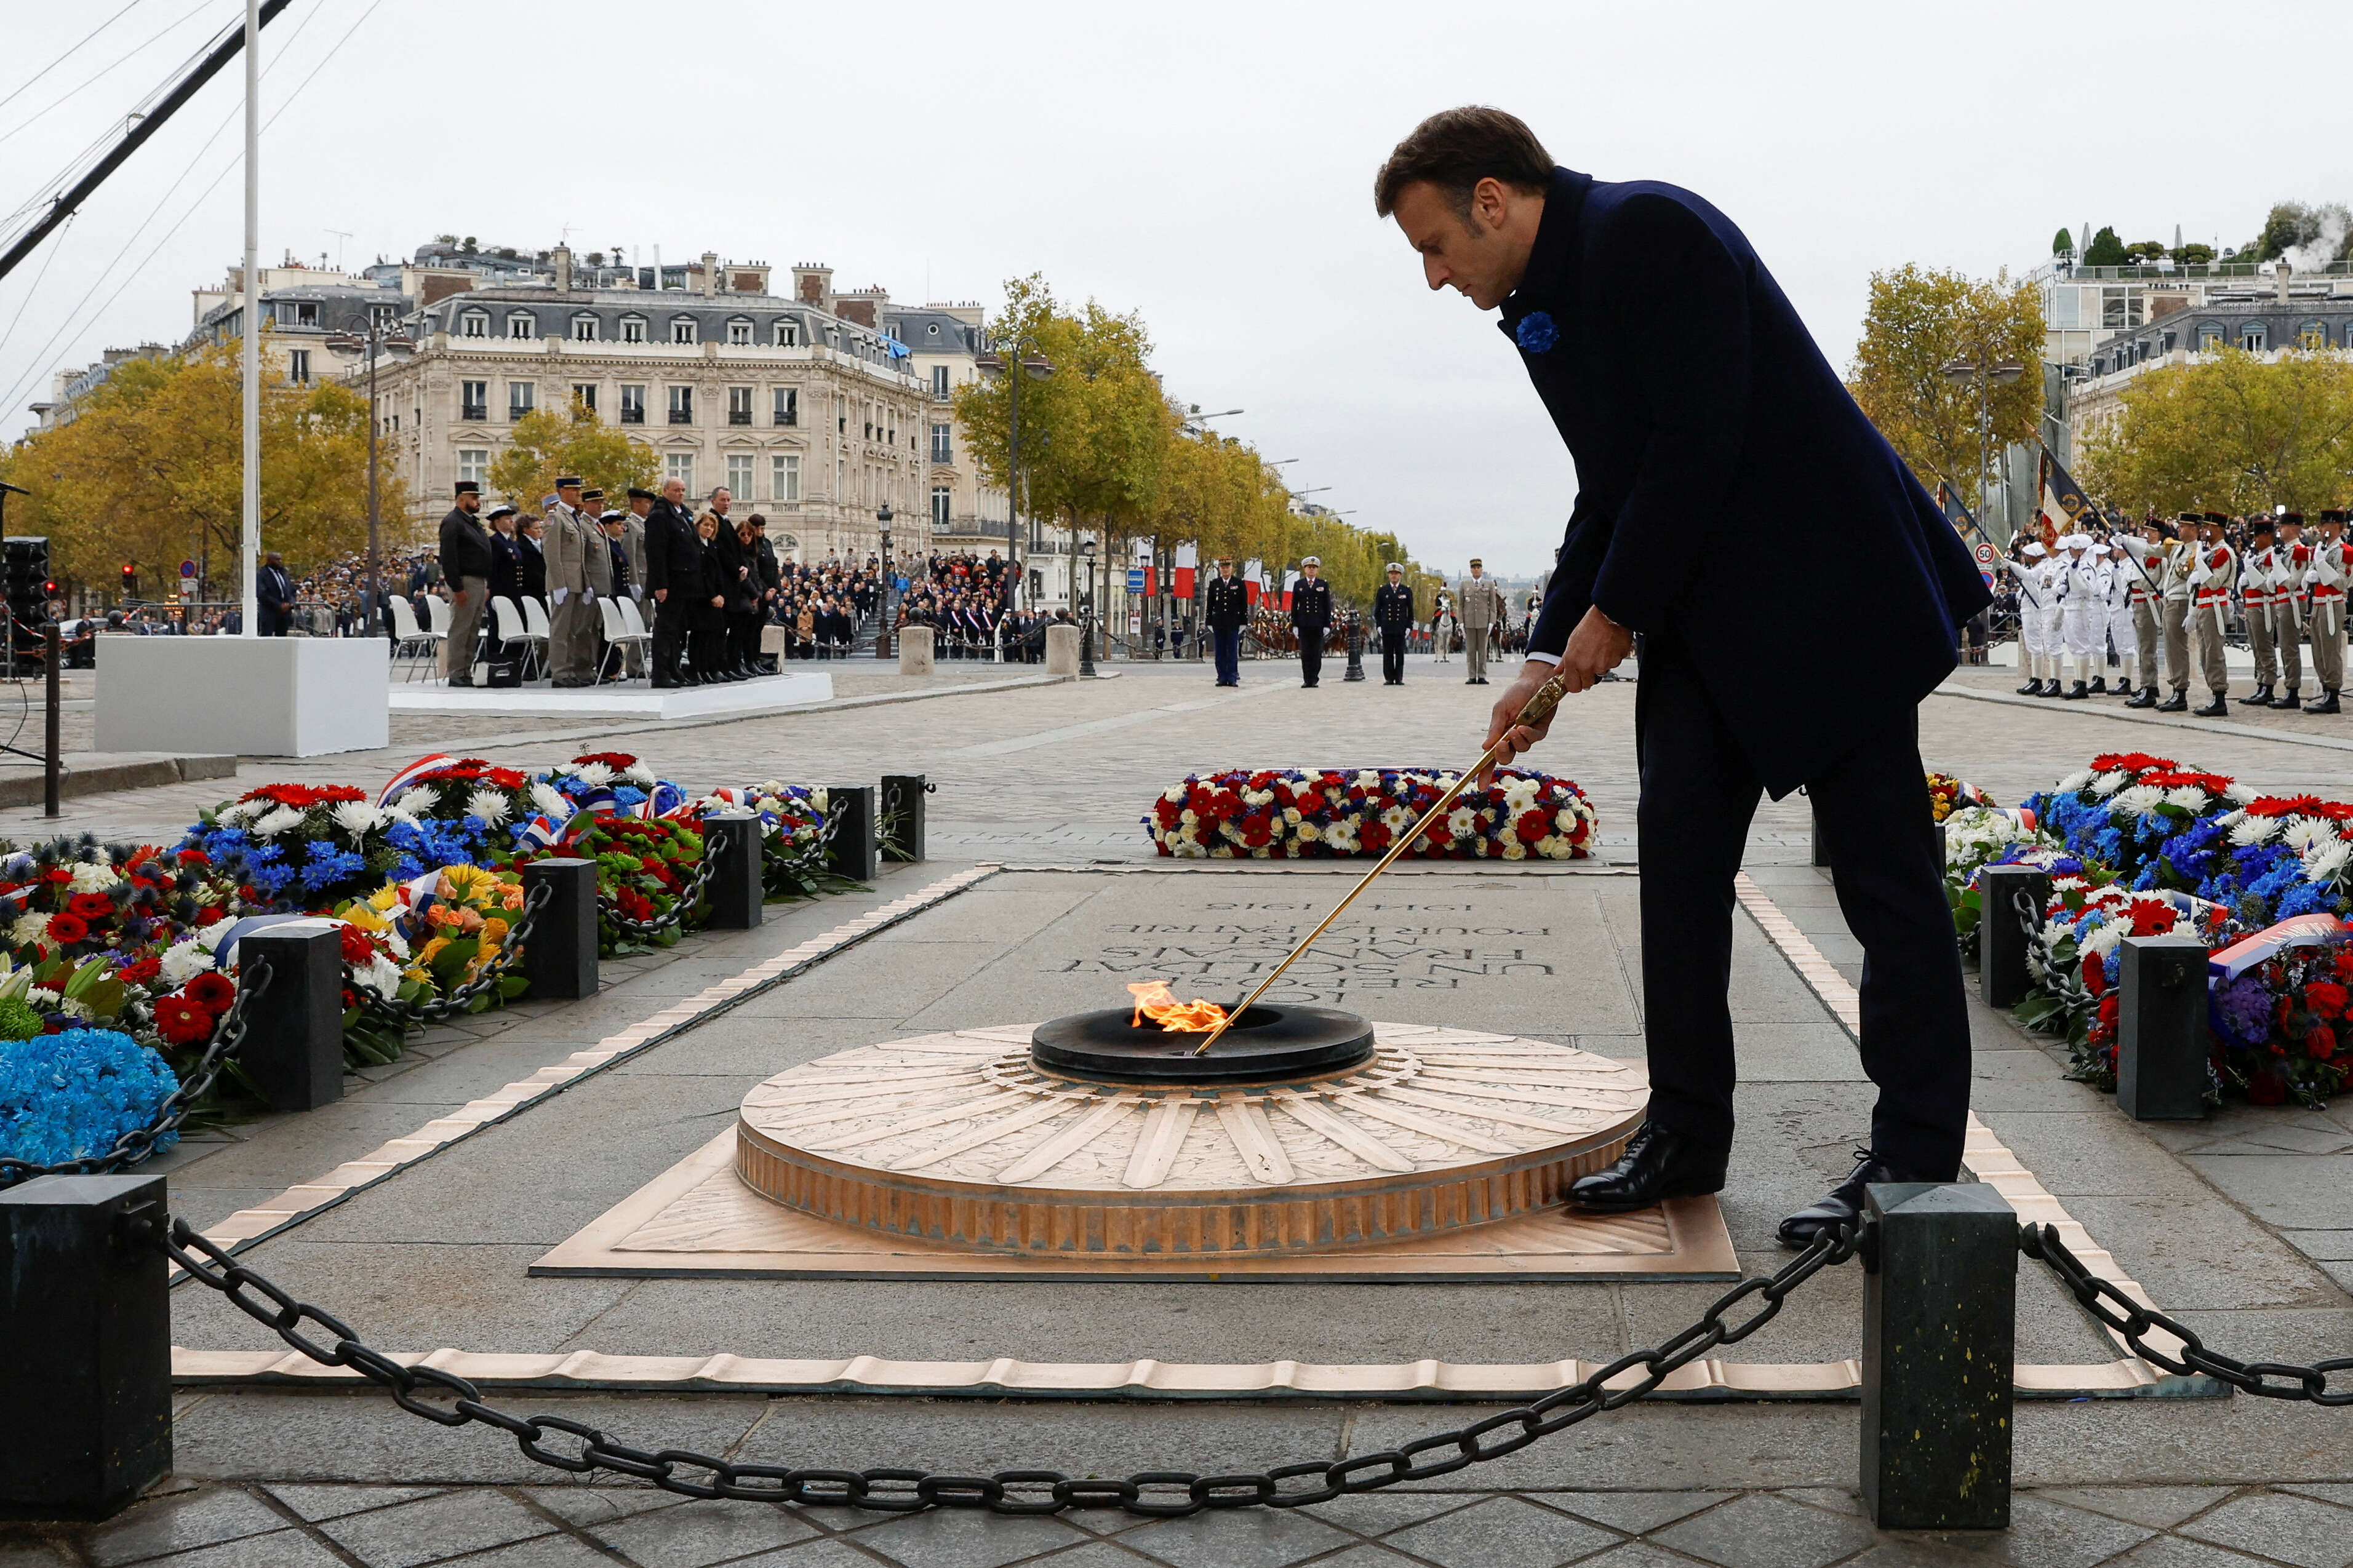 French President Emmanuel Macron adjusts the flame of the Tomb of the Unknown Soldier during a ceremony at the Arc de Triomphe in Paris on November 11, 2022, as part of commemorations marking the 104th anniversary of the November 11, 1918 Armistice, ending World War I (WWI). (Photo by GONZALO FUENTES / POOL / AFP)